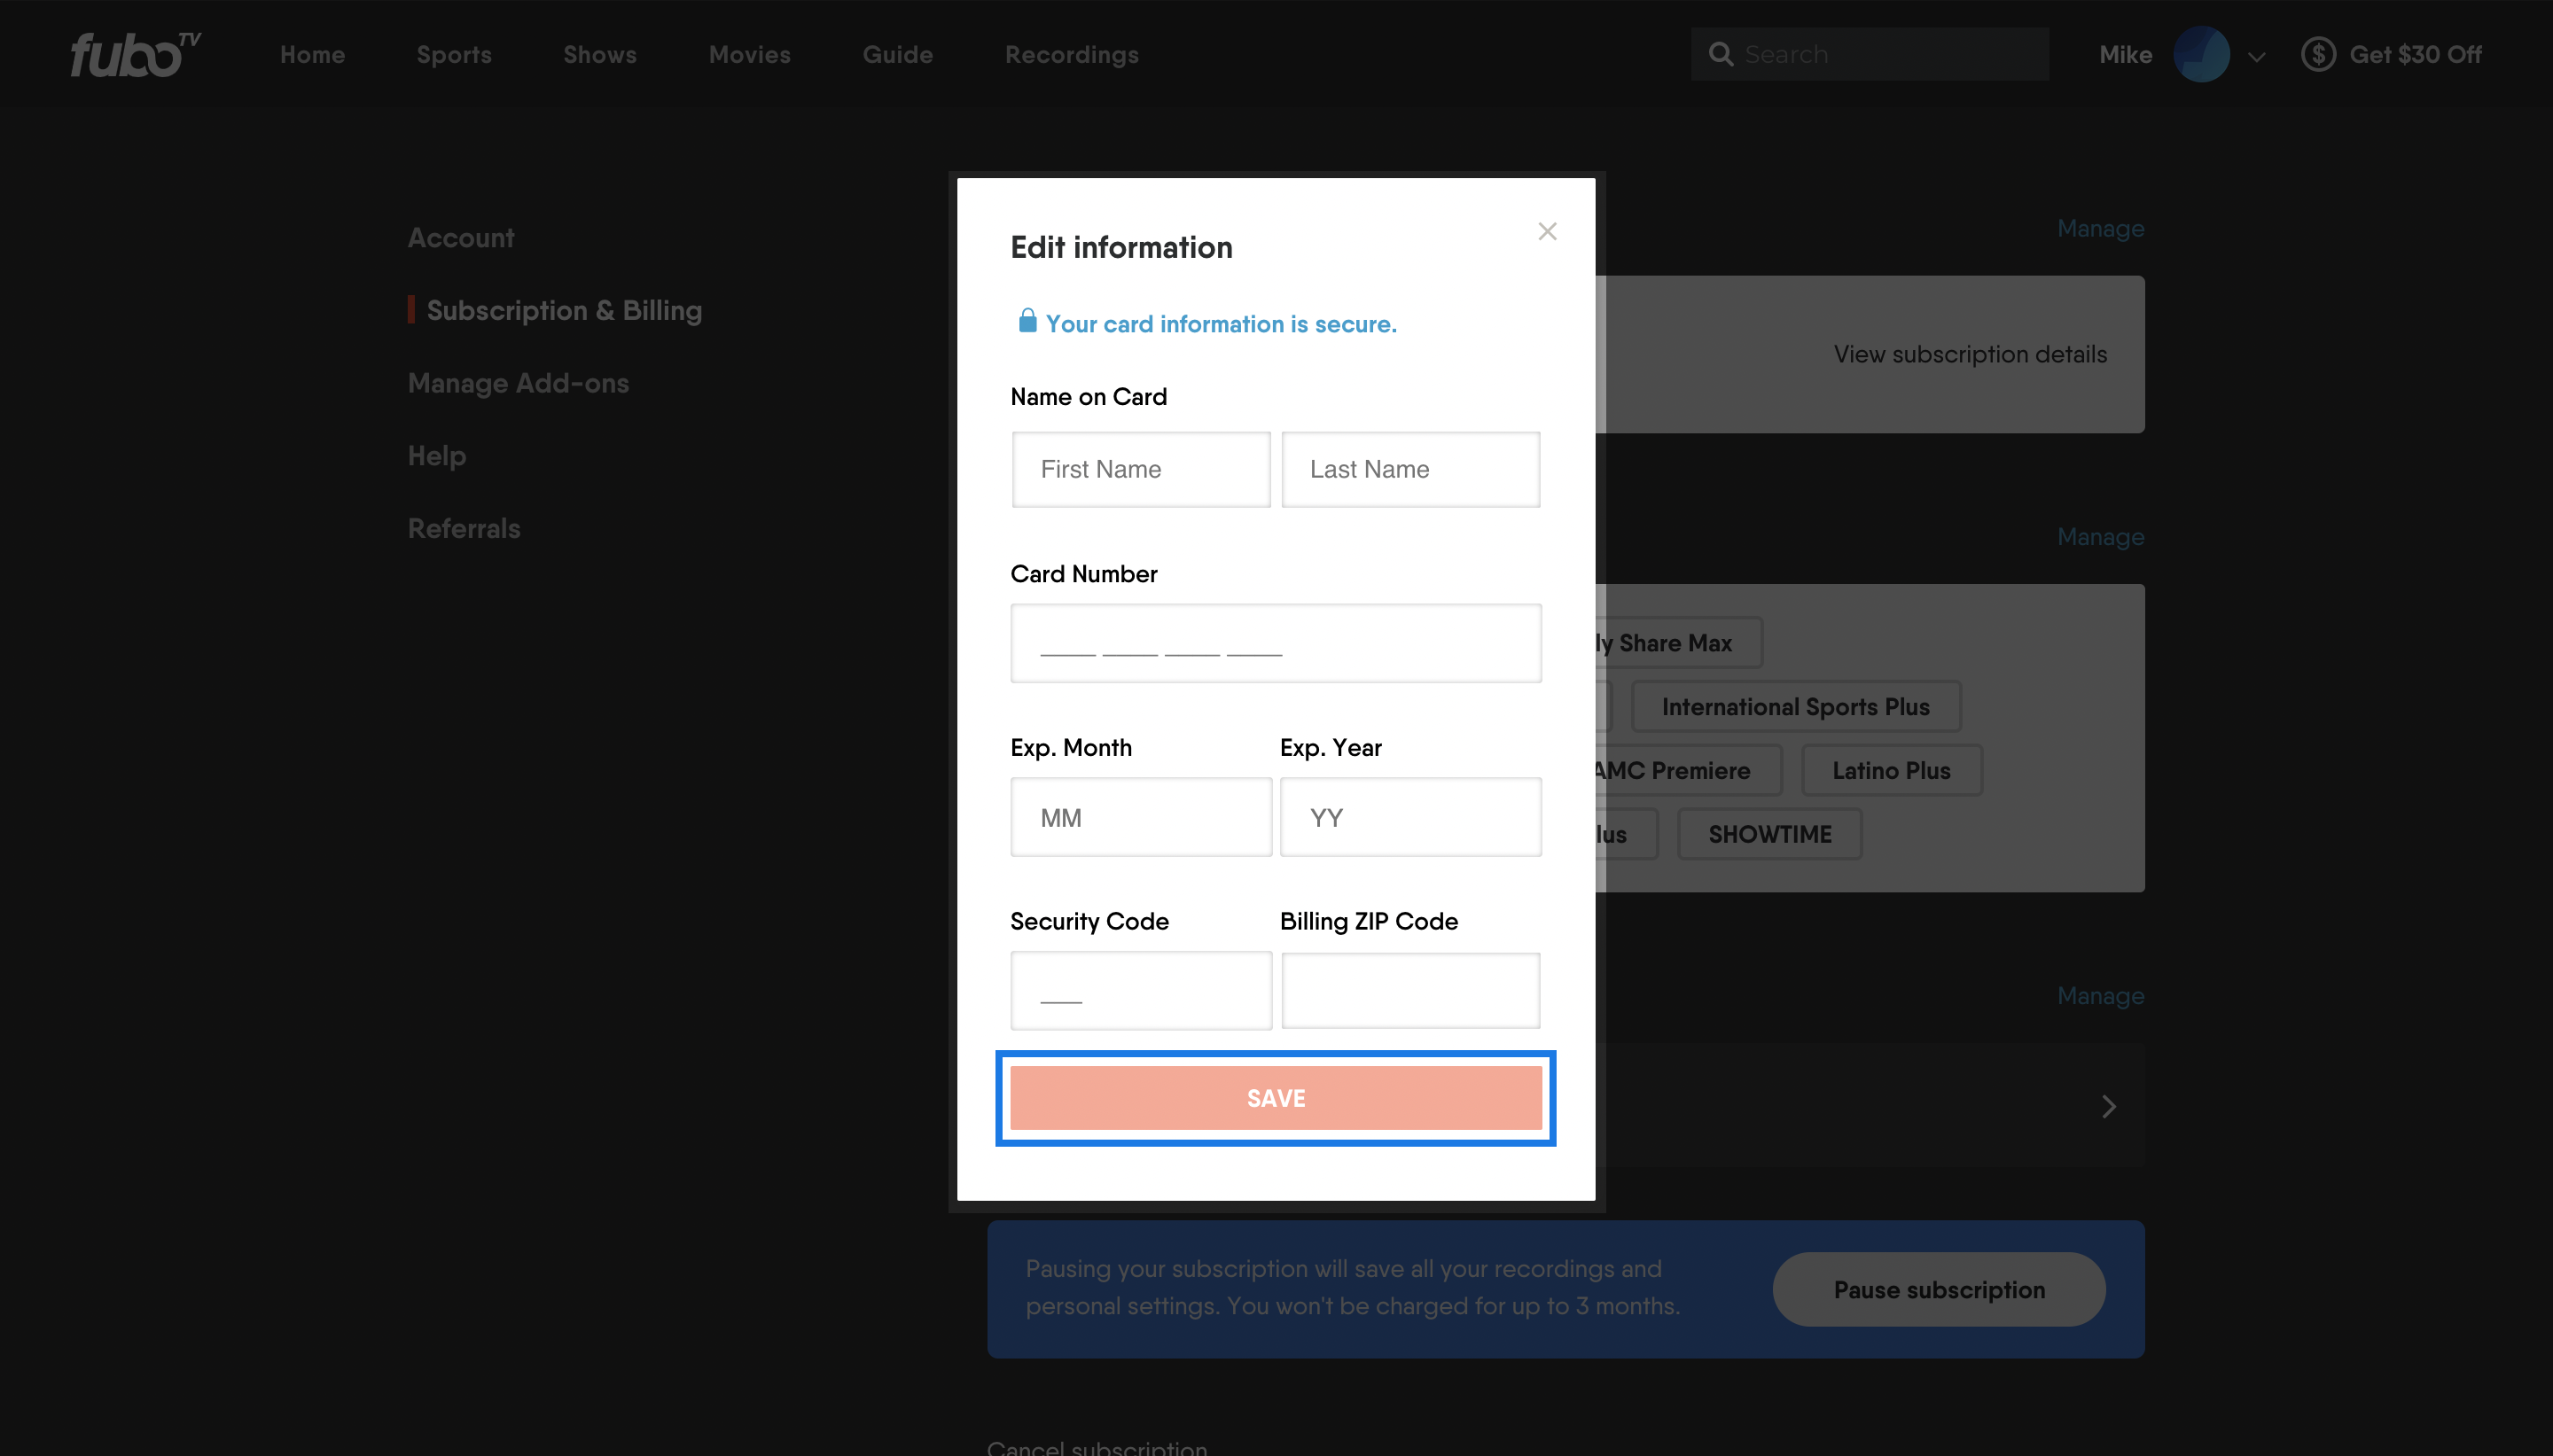 FuboTV new payment method entry form with SAVE button highlighted